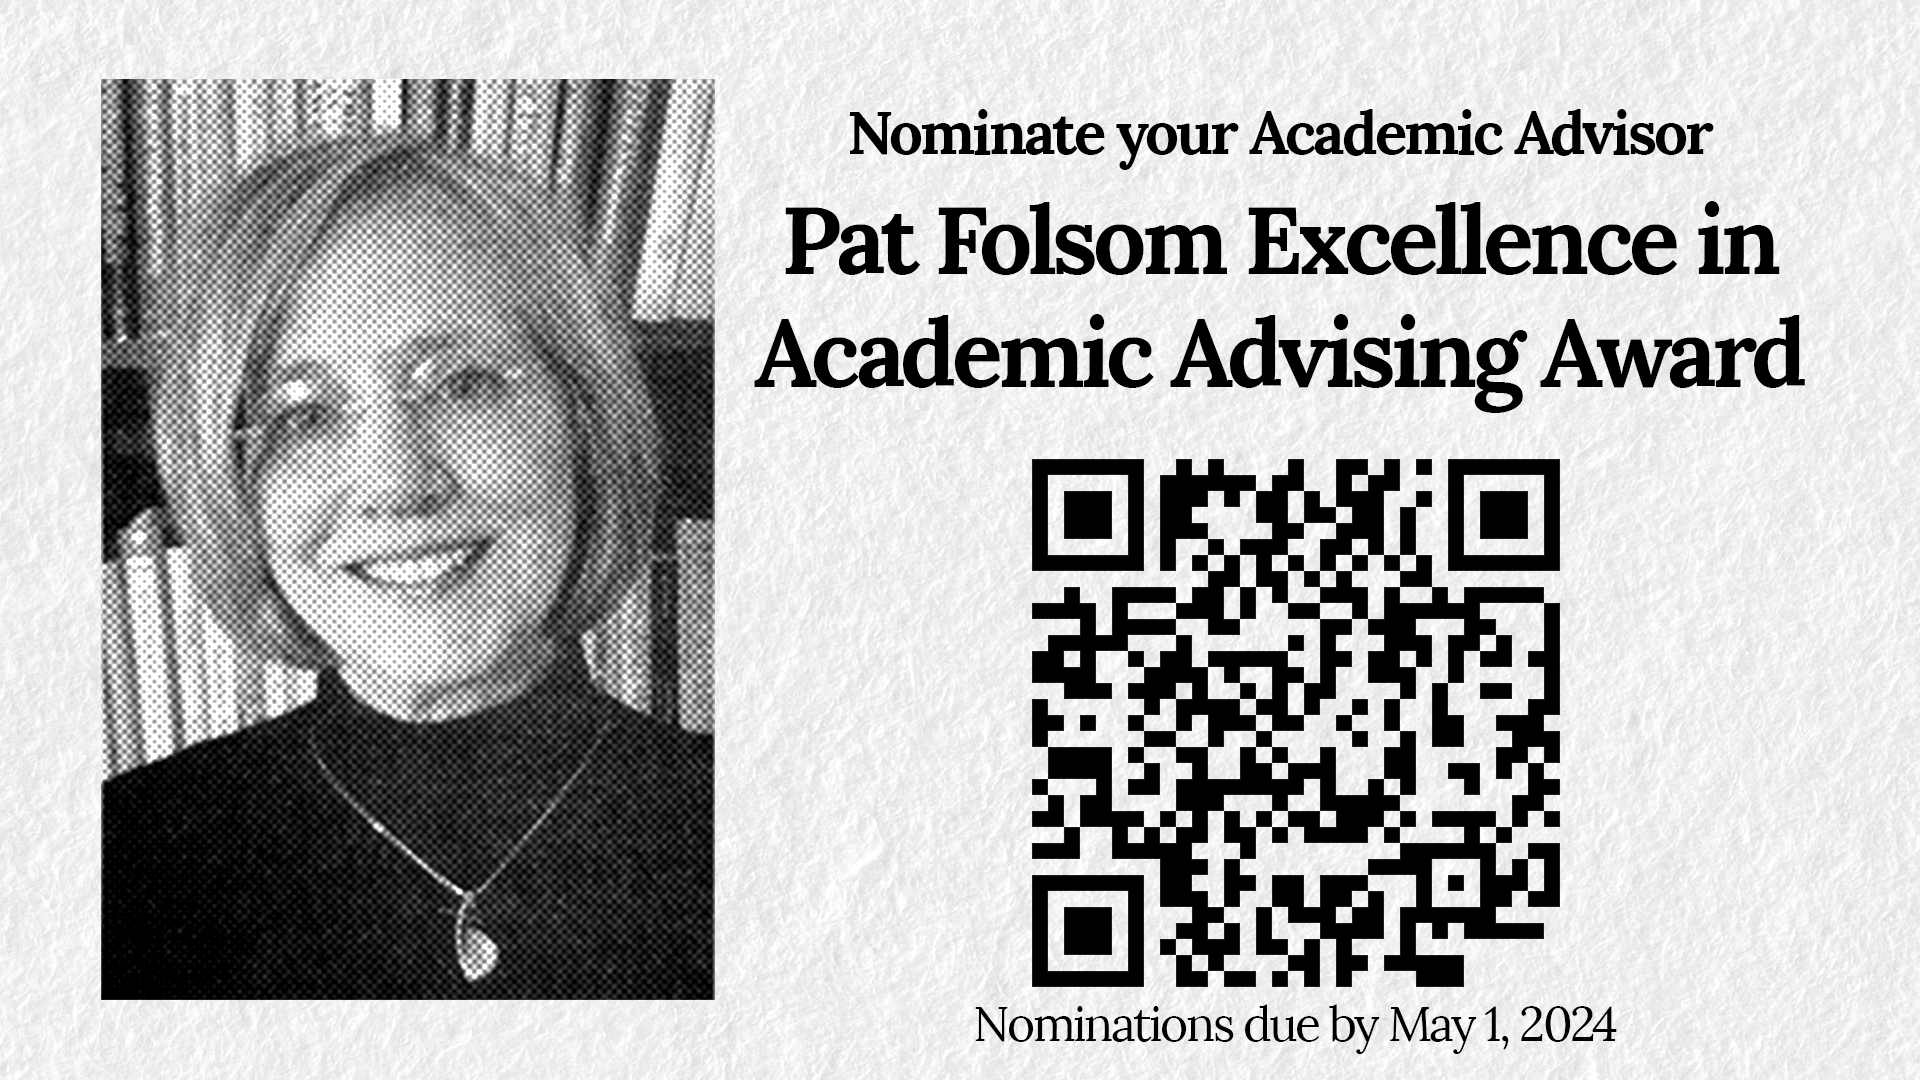 Nominate your academic advisor for  Pat Folsom Excellence in Academic Advising Award